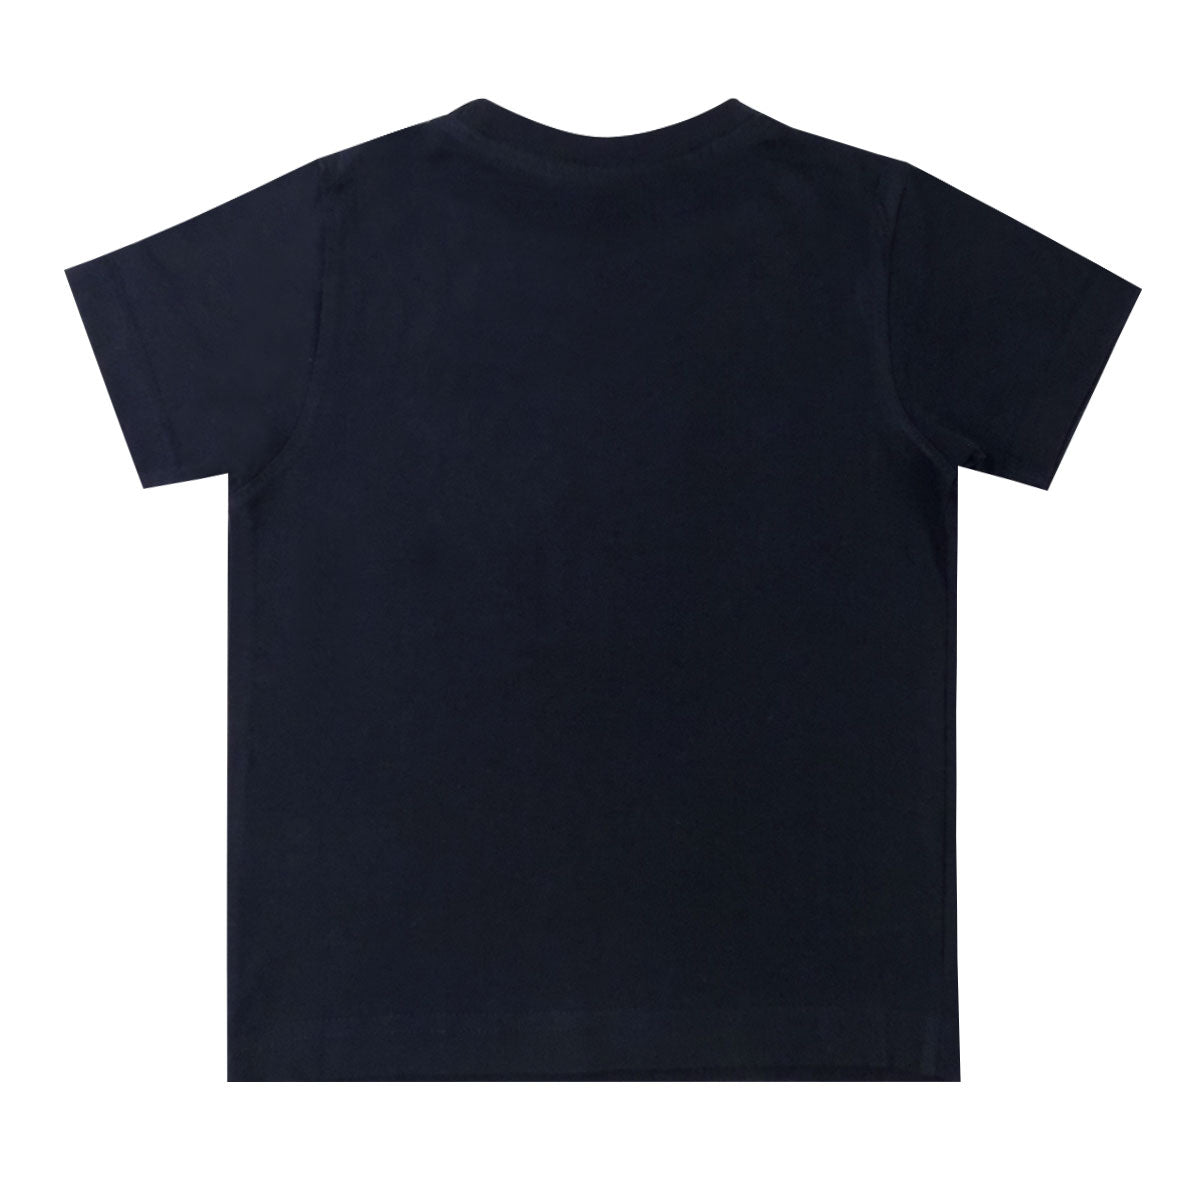 One In A Million - Premium Round Neck Cotton Tees for Kids - Navy Blue